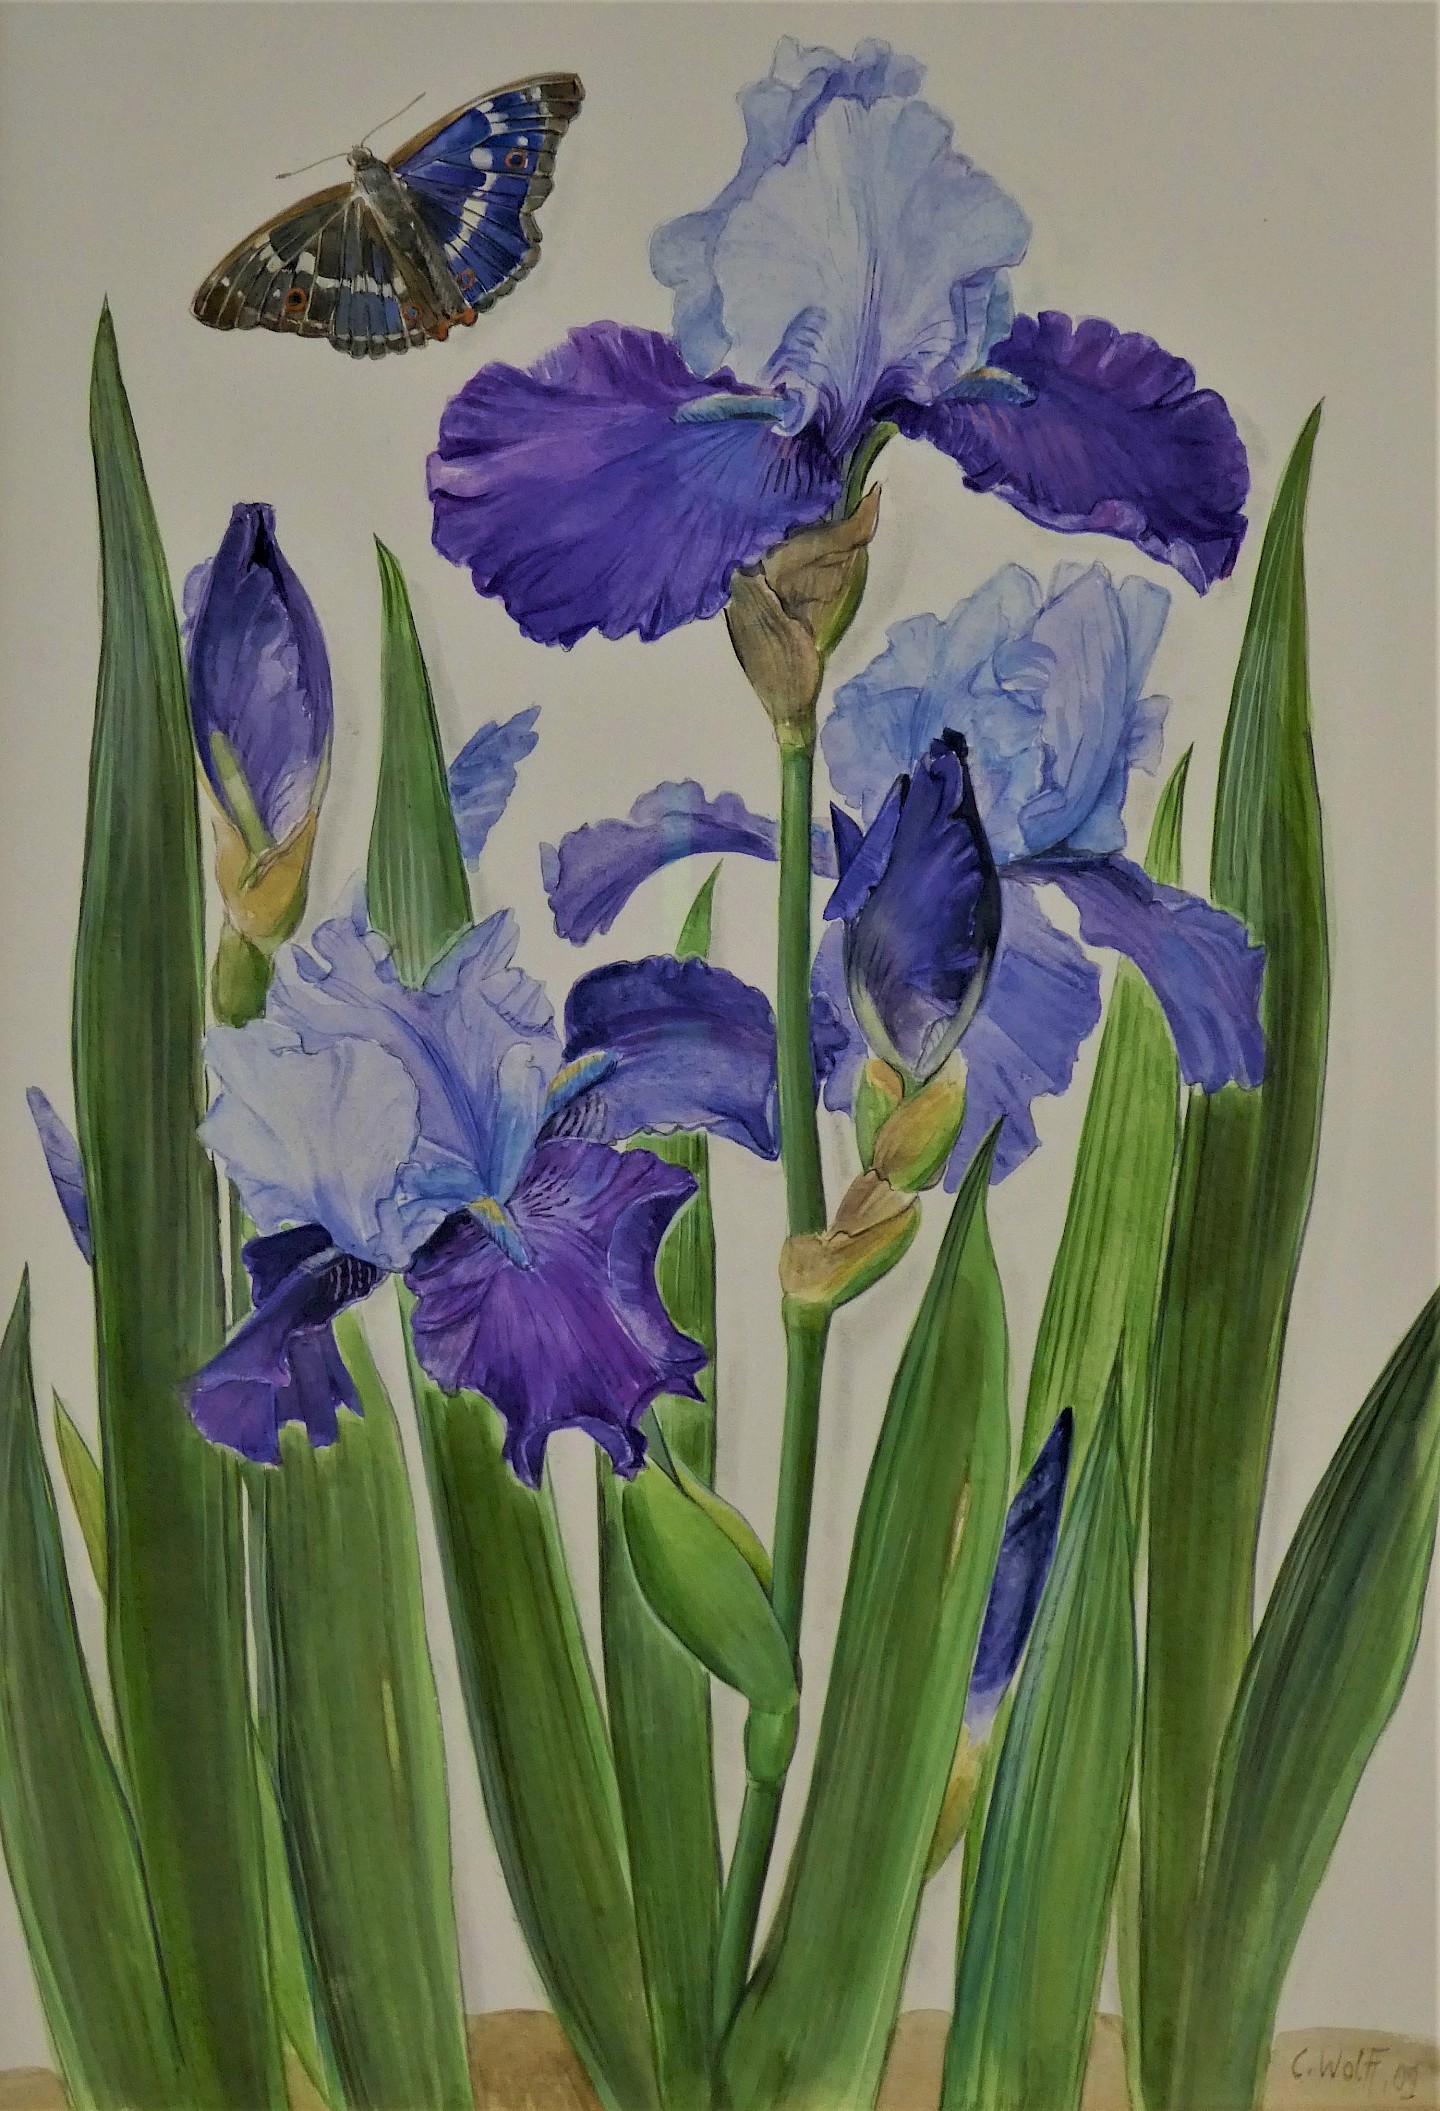 Cornelie Wolff, Iris in Aquarell with Butterfly, 2015